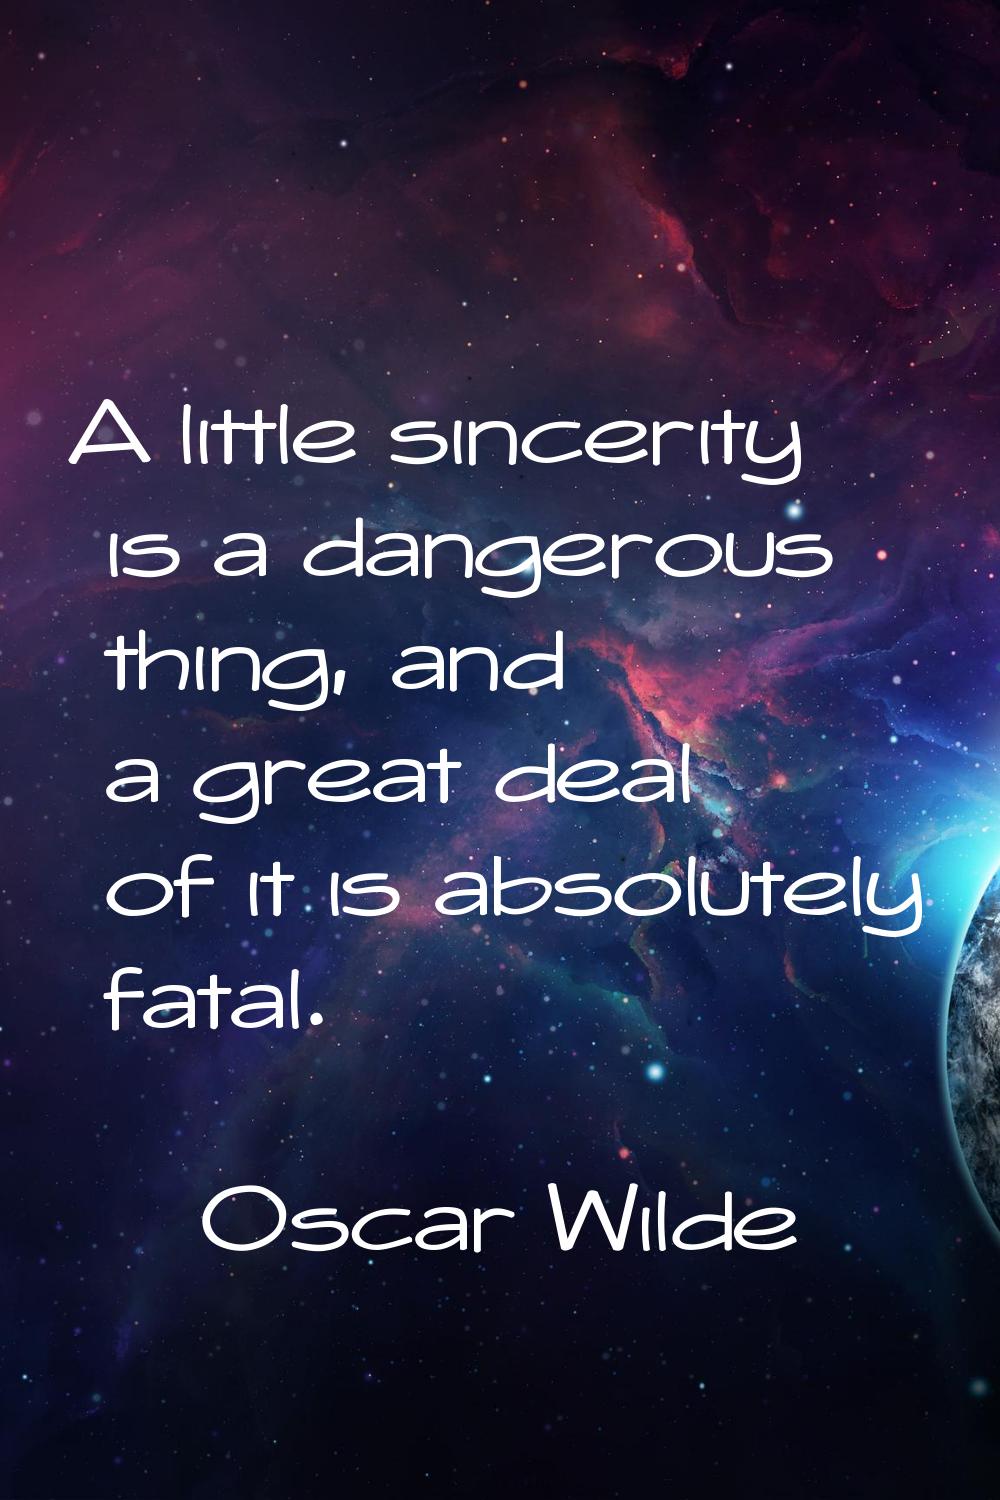 A little sincerity is a dangerous thing, and a great deal of it is absolutely fatal.